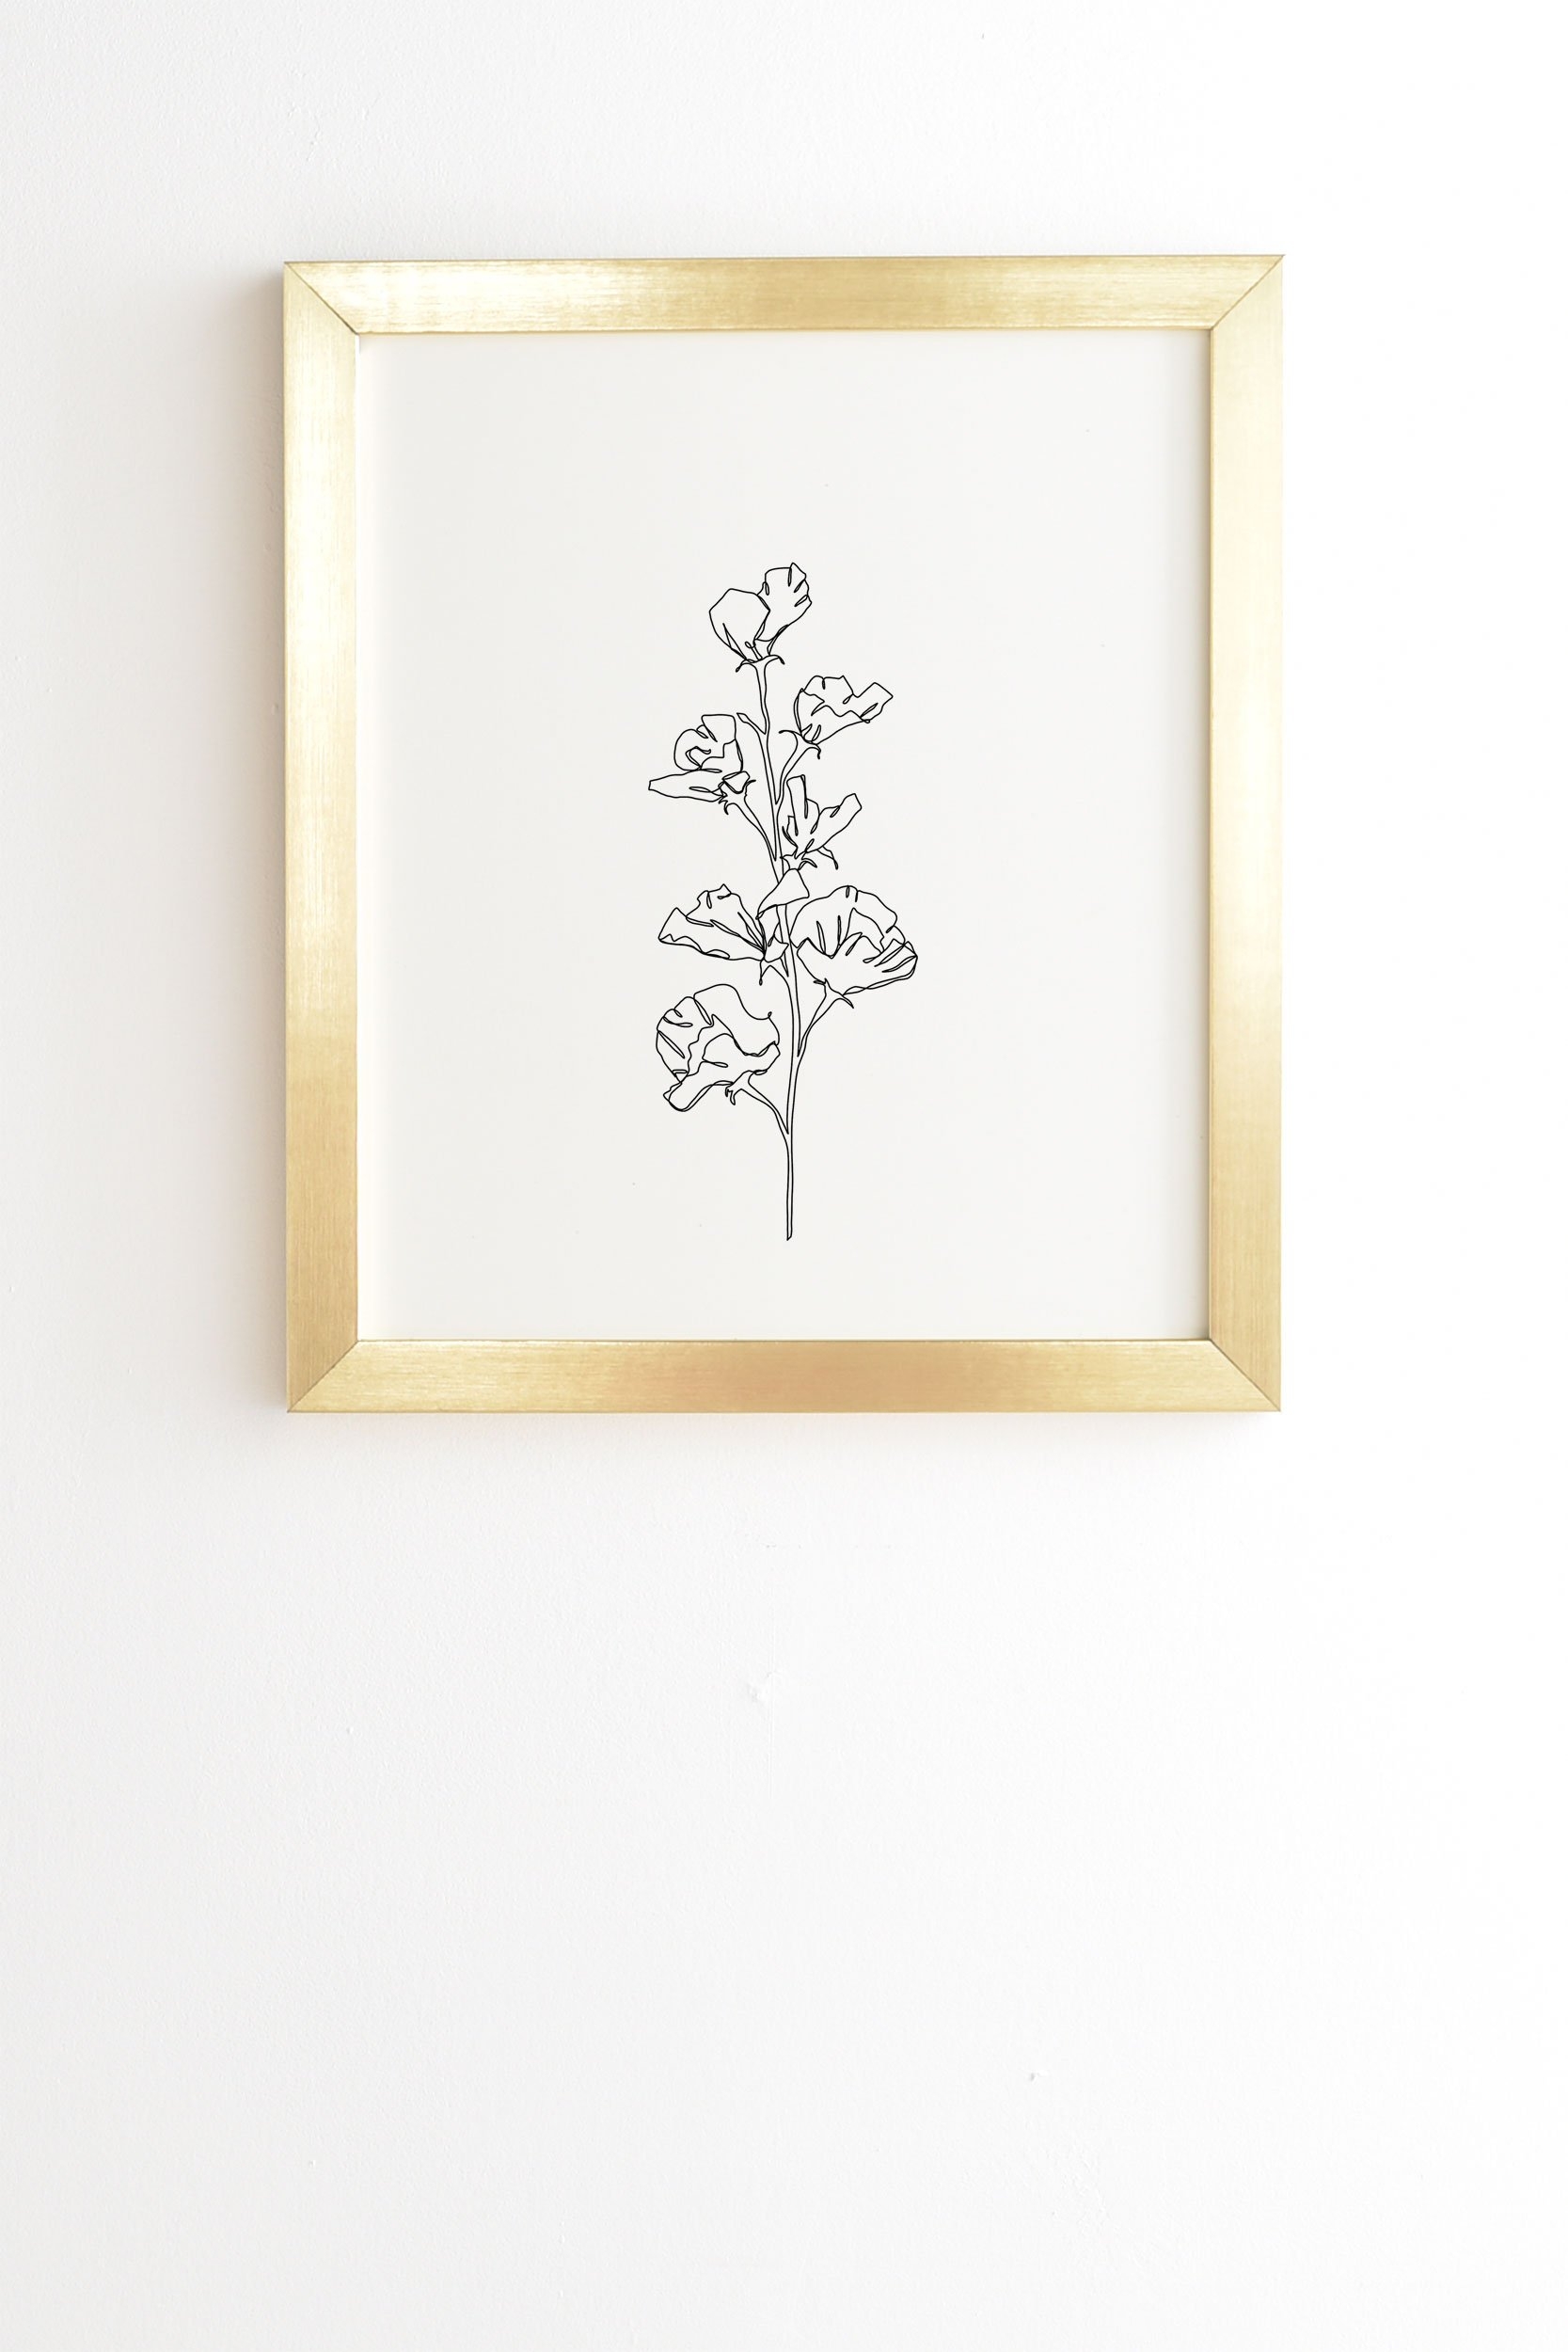 GOLD FRAMED WALL ART COTTON FLOWER ILLUSTRATION  BY THE COLOUR STUDY - Image 0